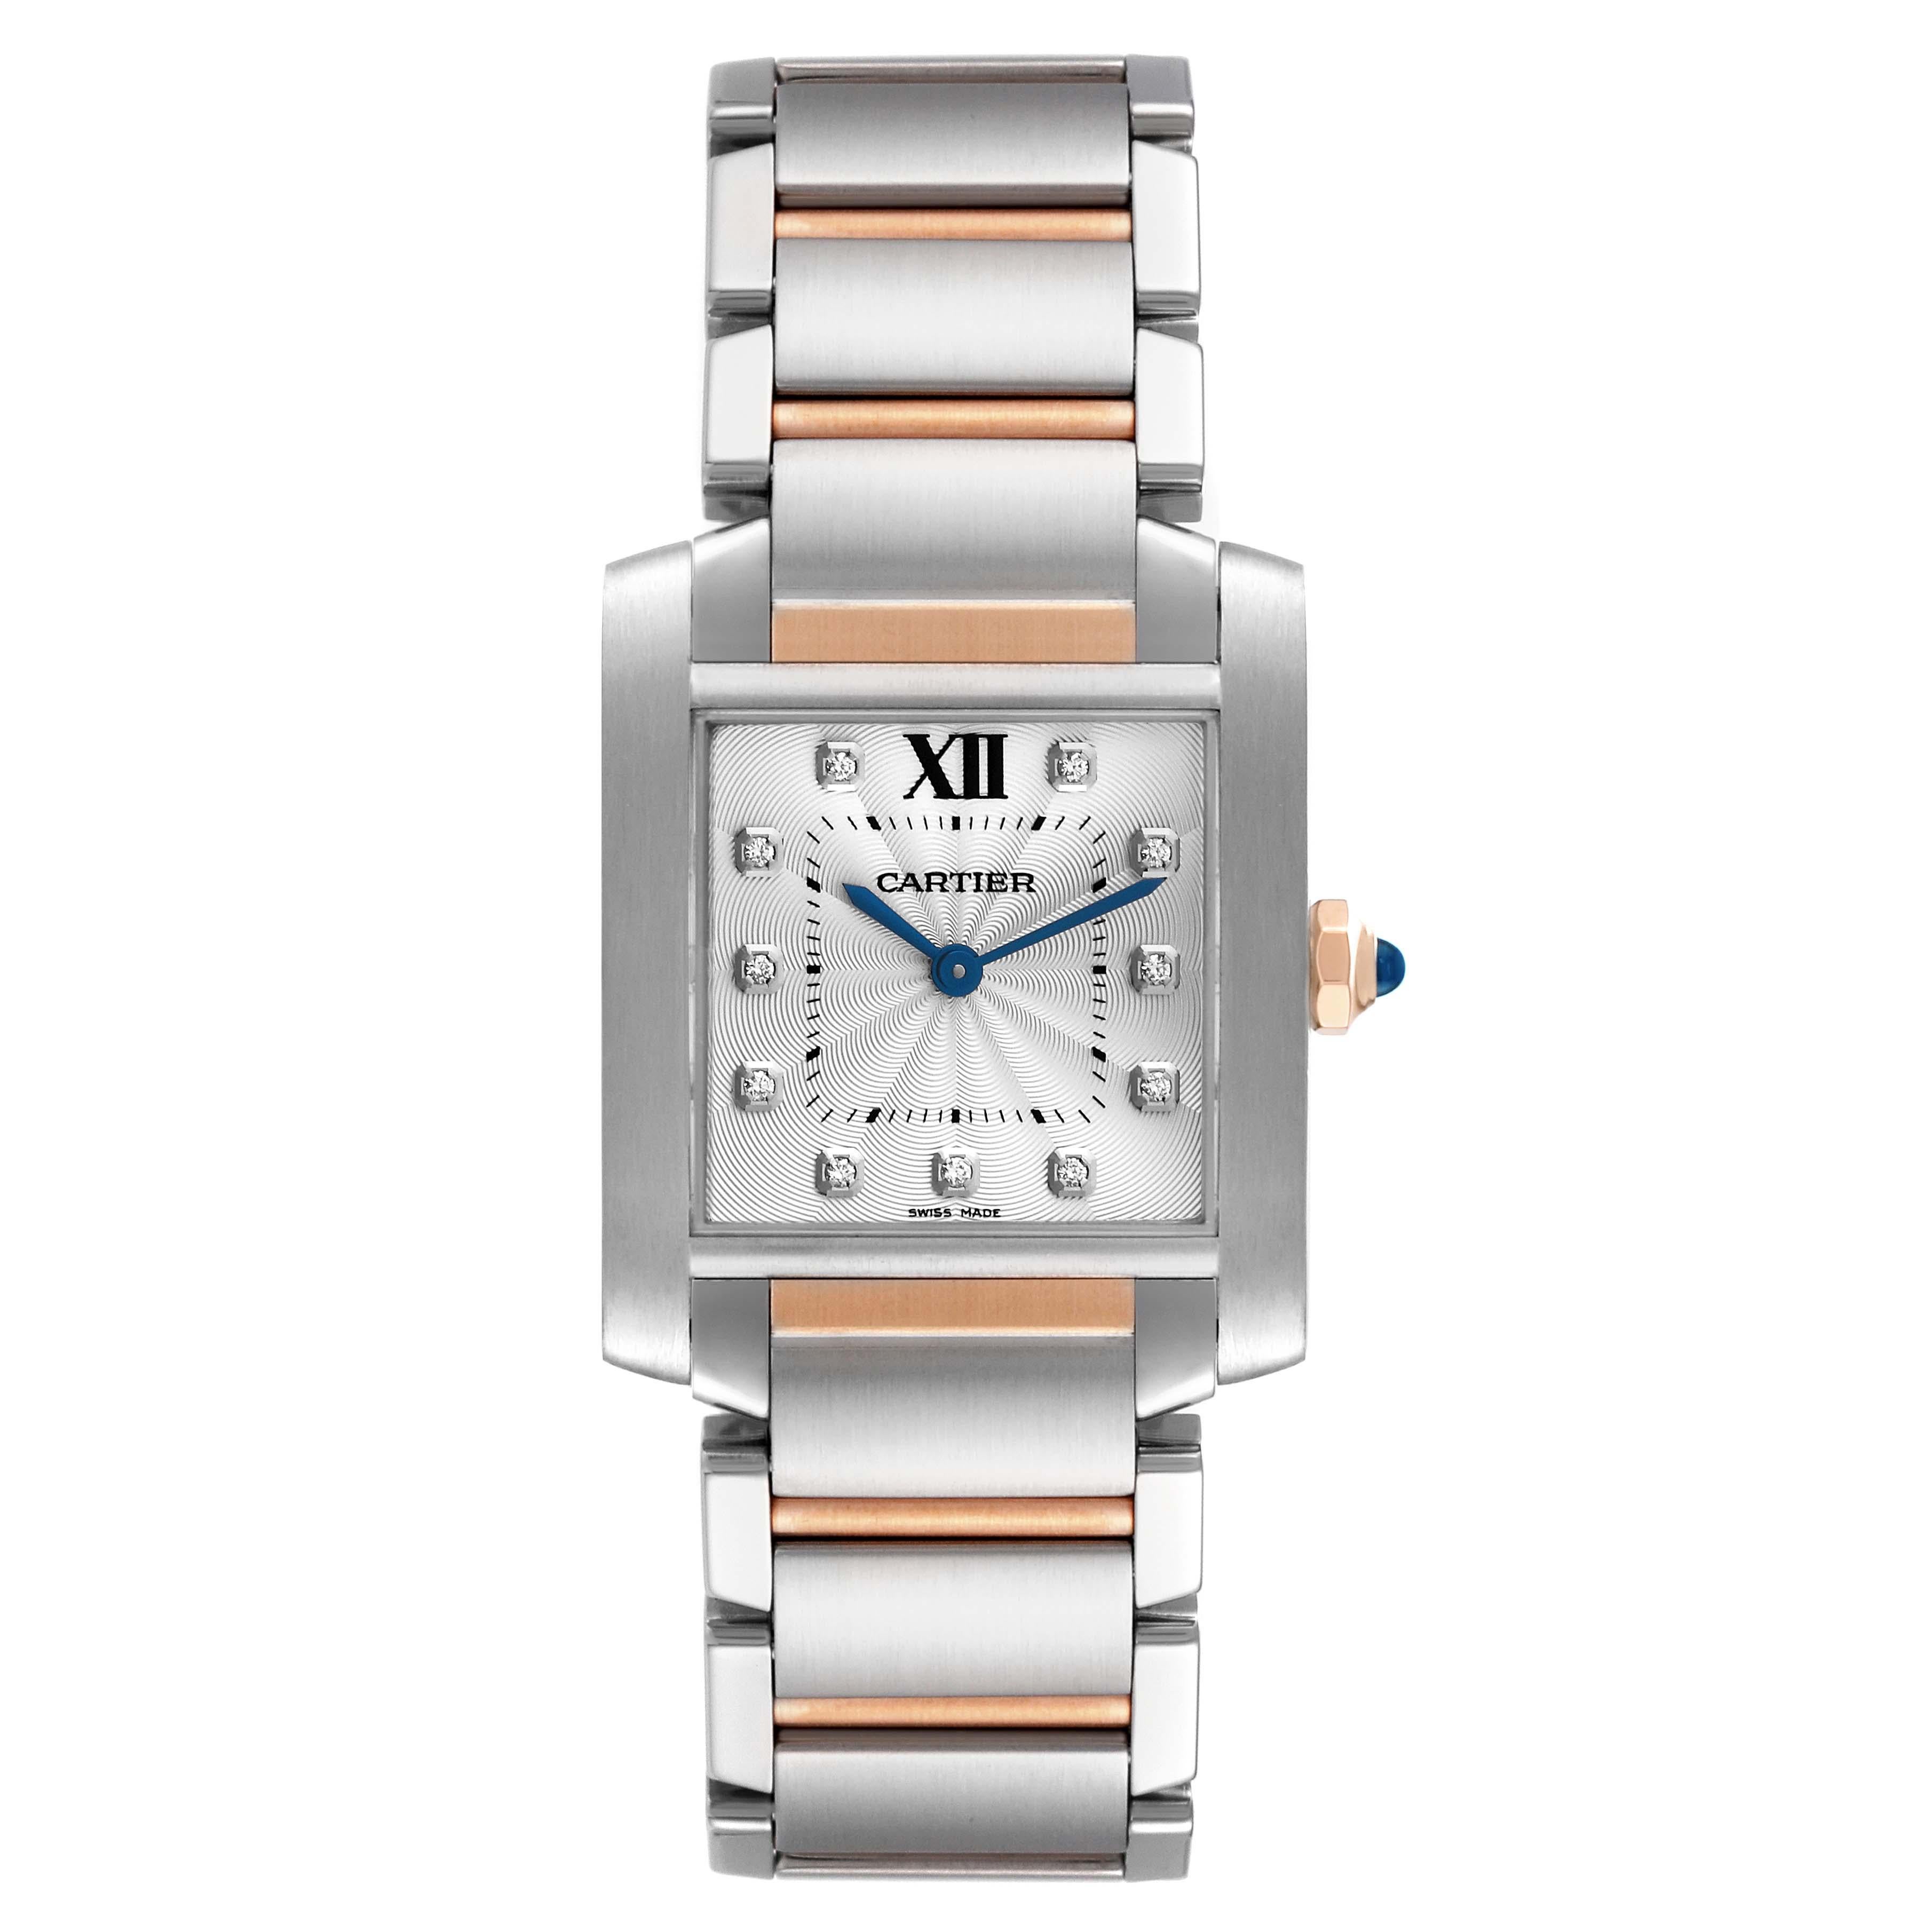 Cartier Tank Francaise Midsize Diamond Steel Rose Gold Ladies Watch WE110005. Quartz movement. Rectangular stainless steel 25.0 X 30.0 mm case. Octagonal 18k rose gold crown set with a blue spinel cabochon. . Scratch resistant sapphire crystal.